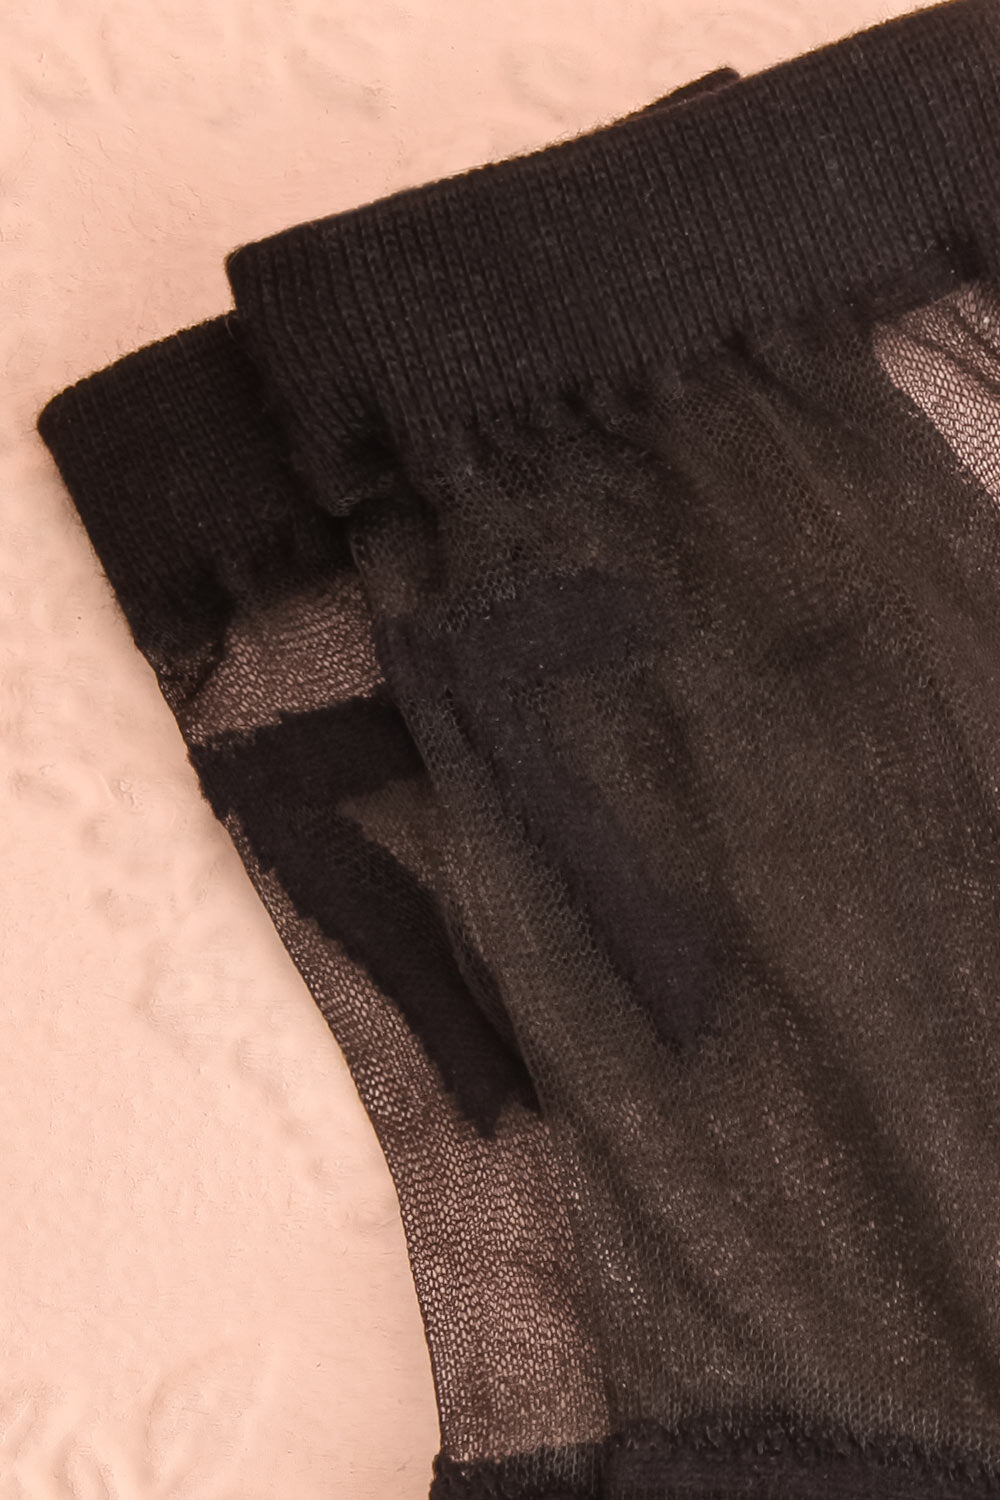 Aniol Black Sheer Mesh Crew Socks w/ Bow Embroidery | Boutique 1861 close-up